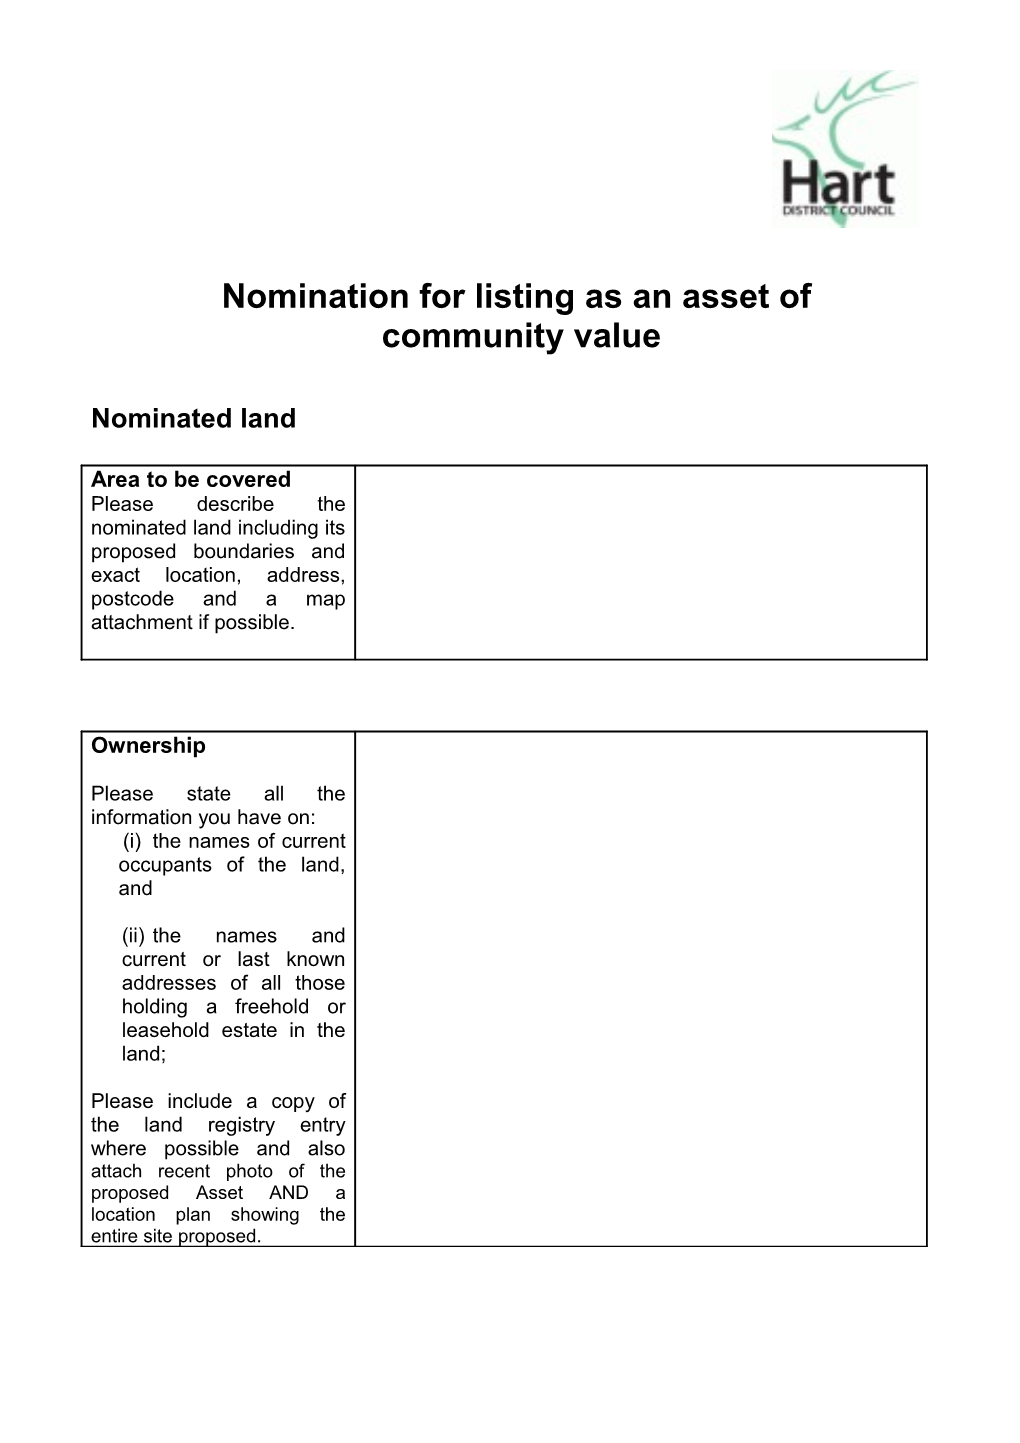 Nomination for Listing As an Asset Of